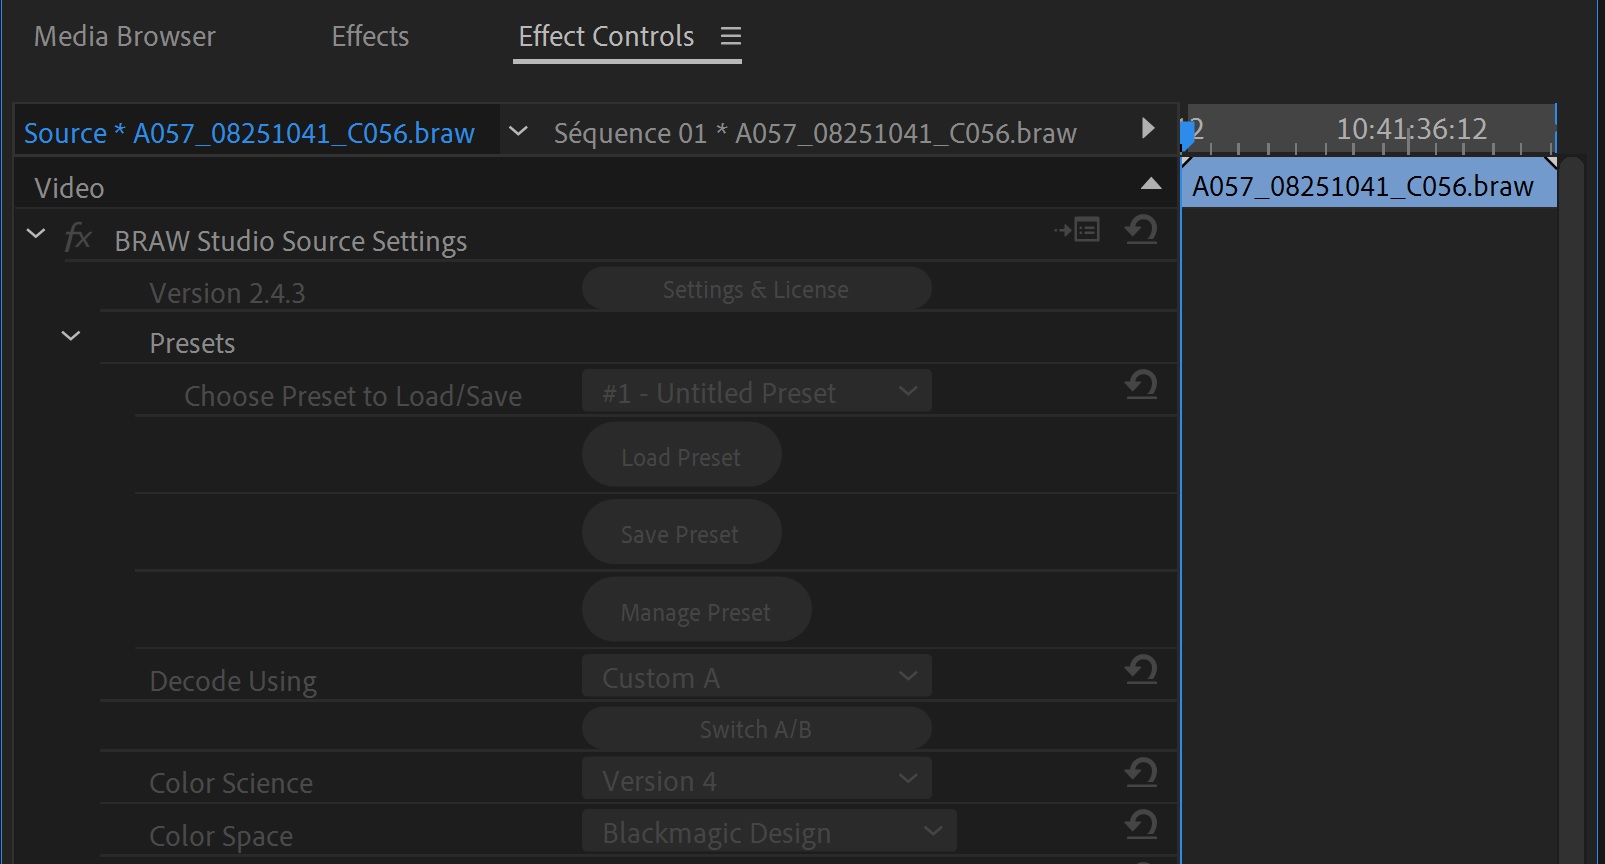 Autokroma BRAW Studio Production SourceSettings disabled